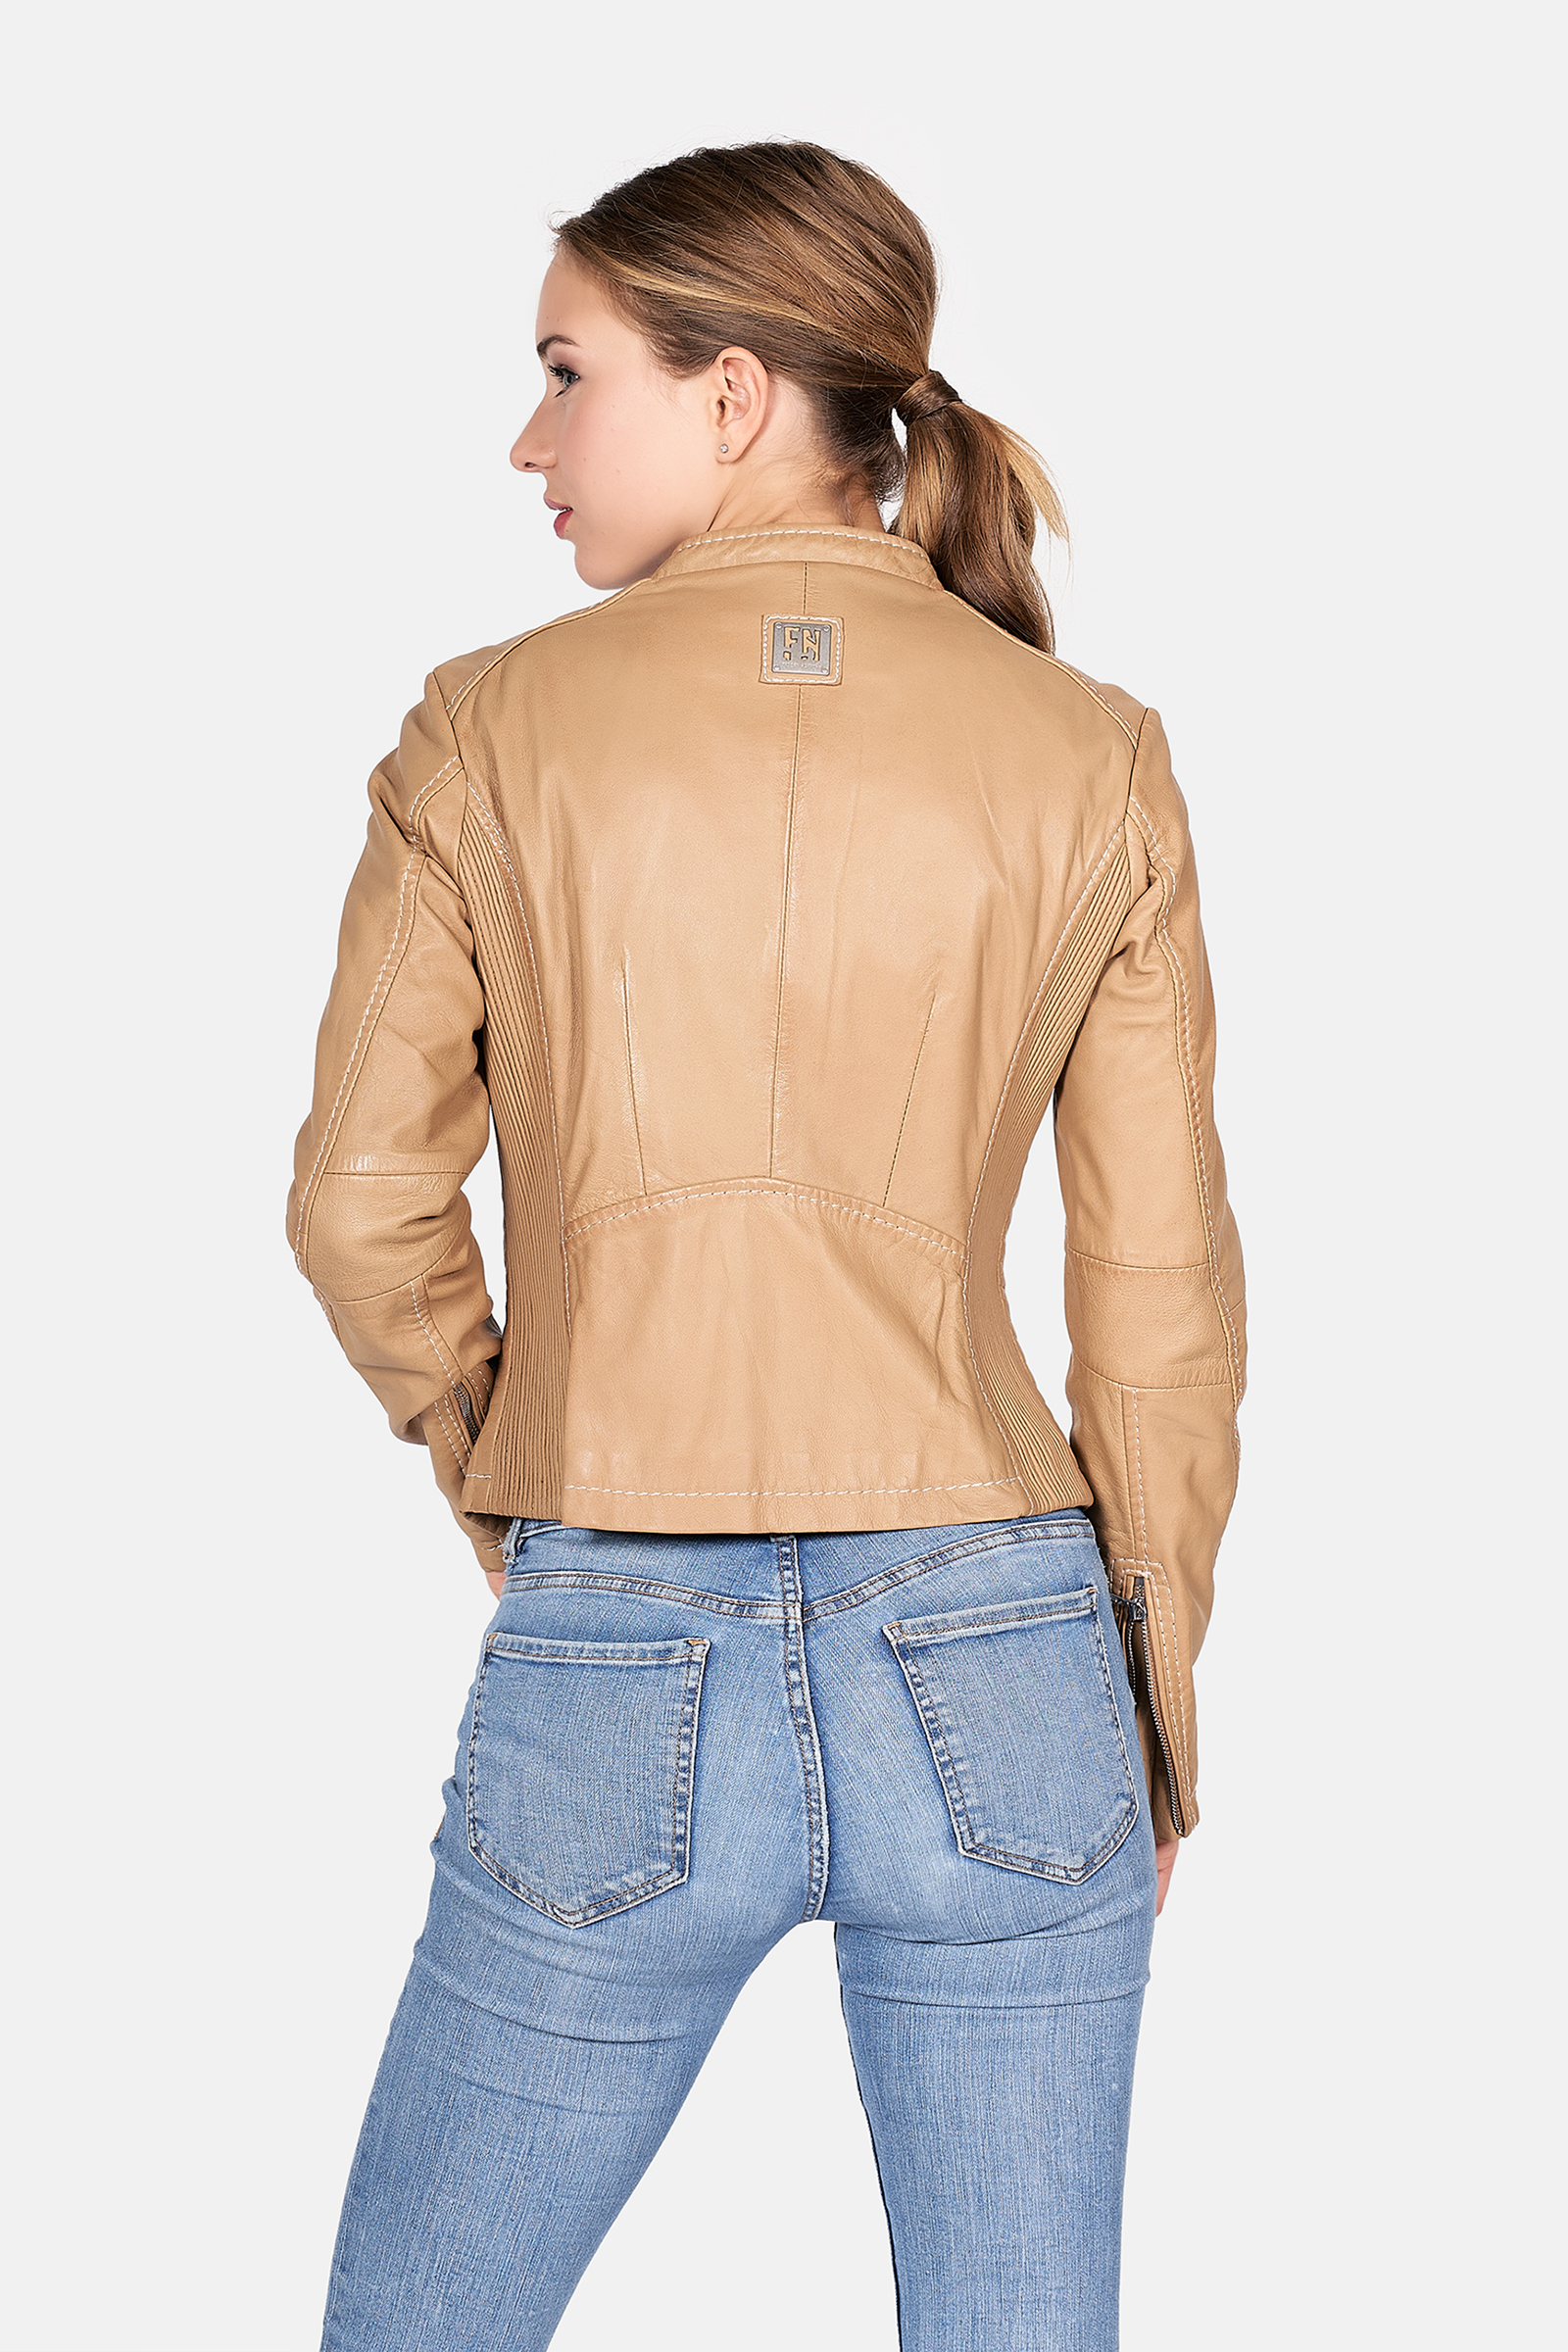 | Freaky | Nation Jackets Leather Women | Emellie-FN